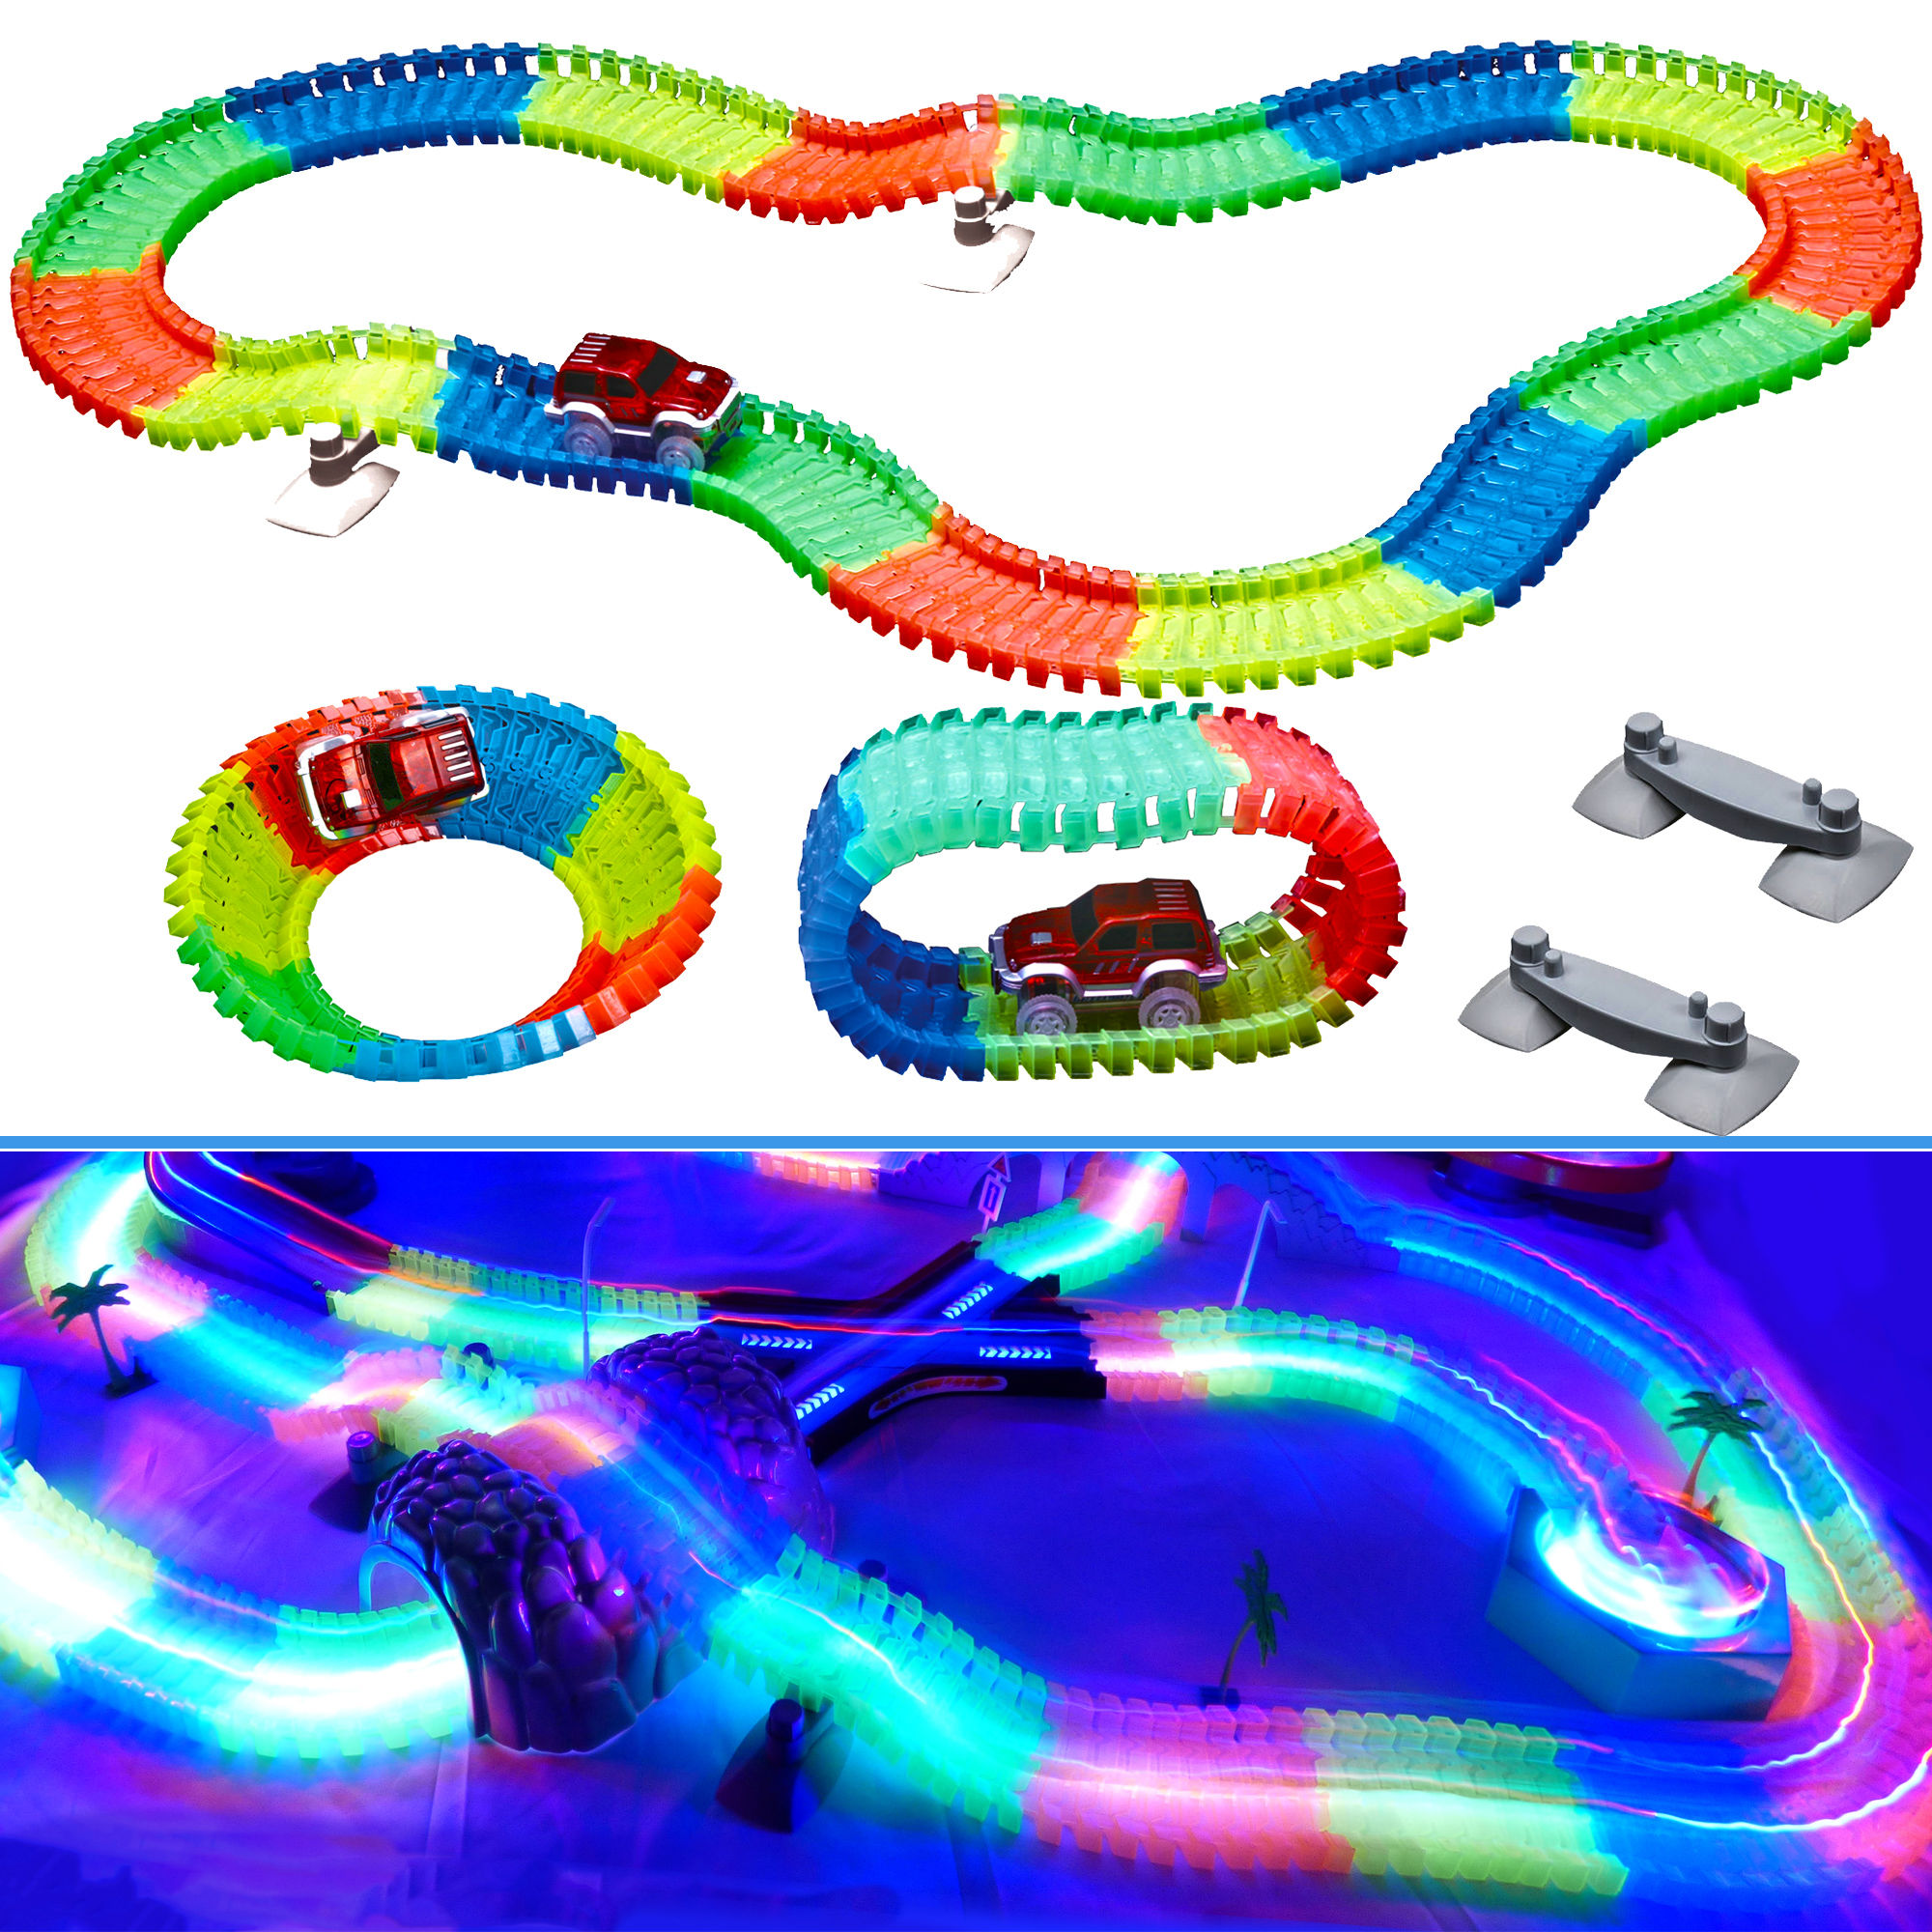 Magical Light Up Twisting Glow In The Dark Race Tracks - Magical Twister Race Track Toy Cars - Endless Glowing Track Possibilities - image 1 of 7